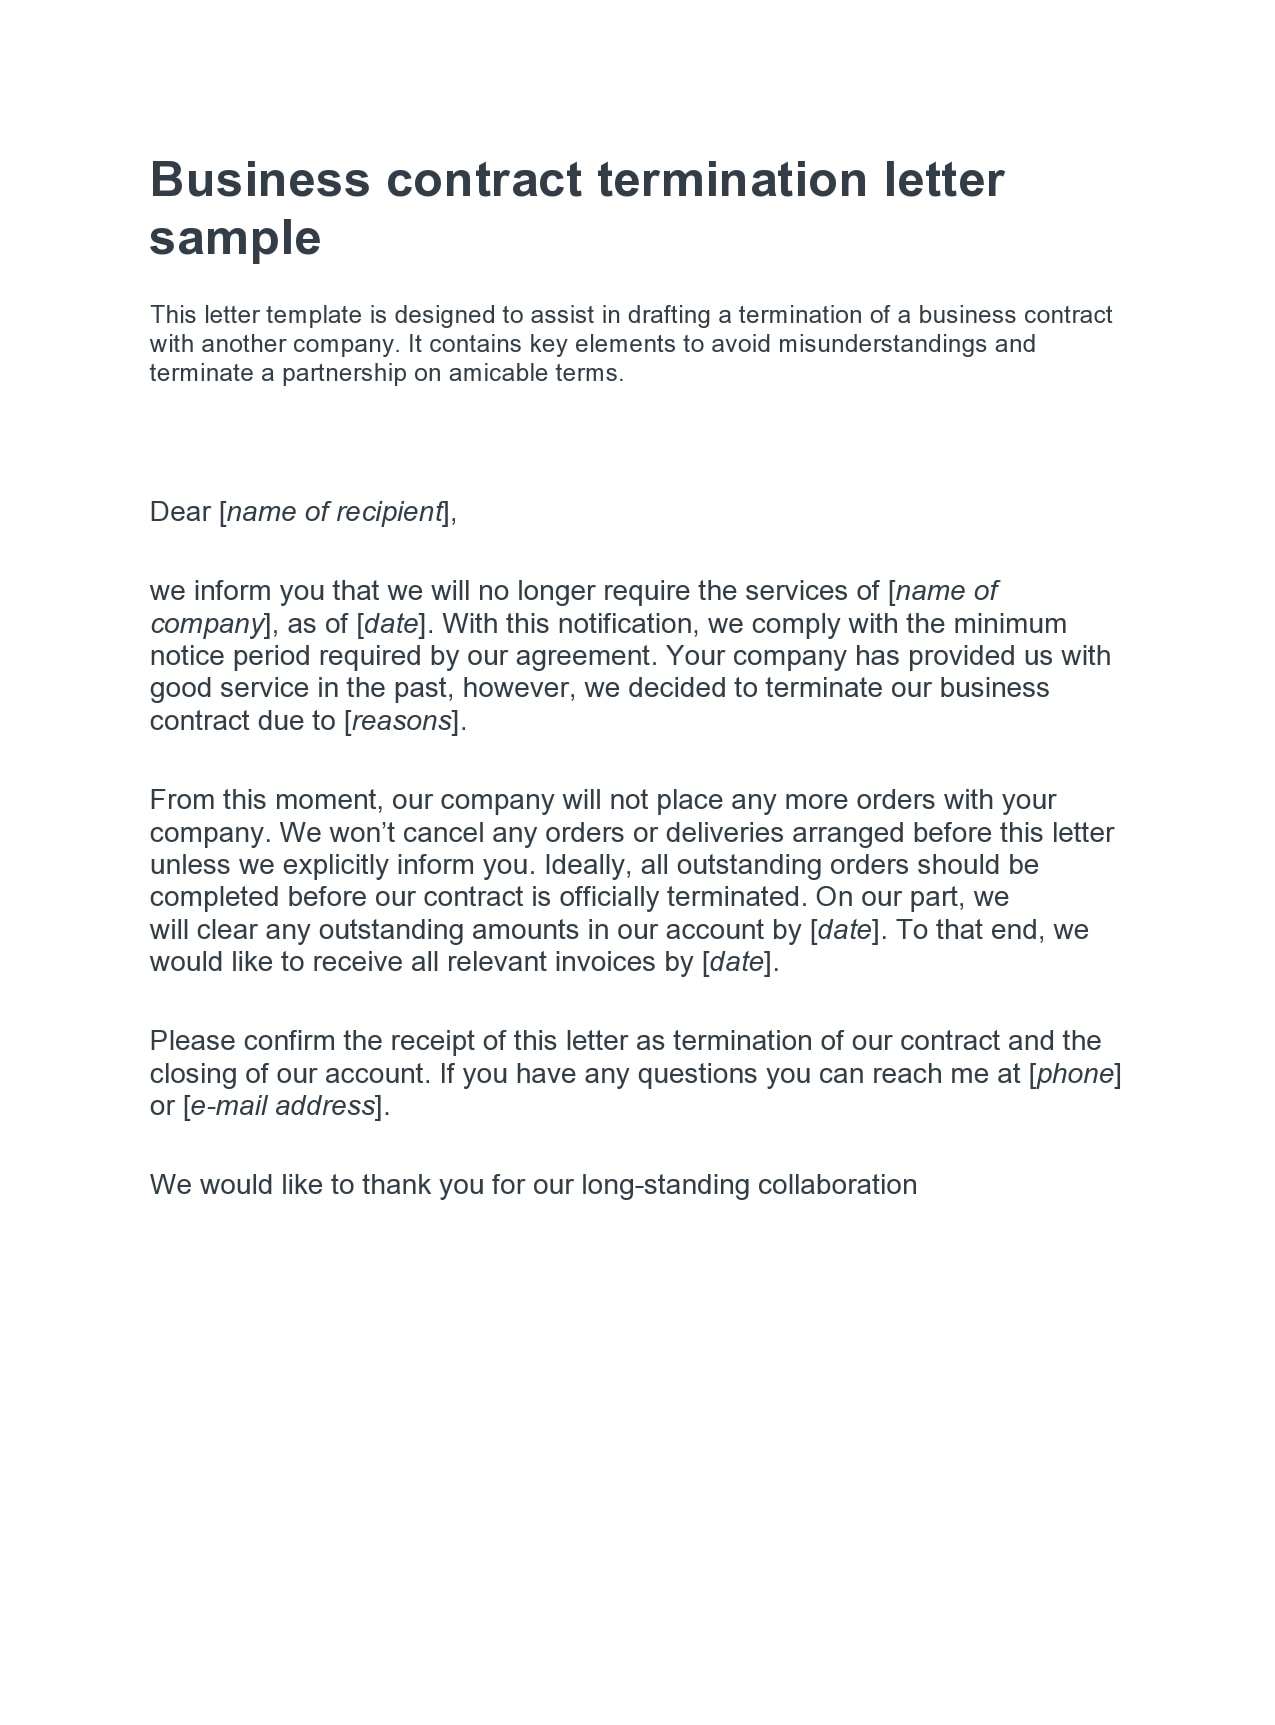 Sample Letter To Fire A Contractor from templatearchive.com